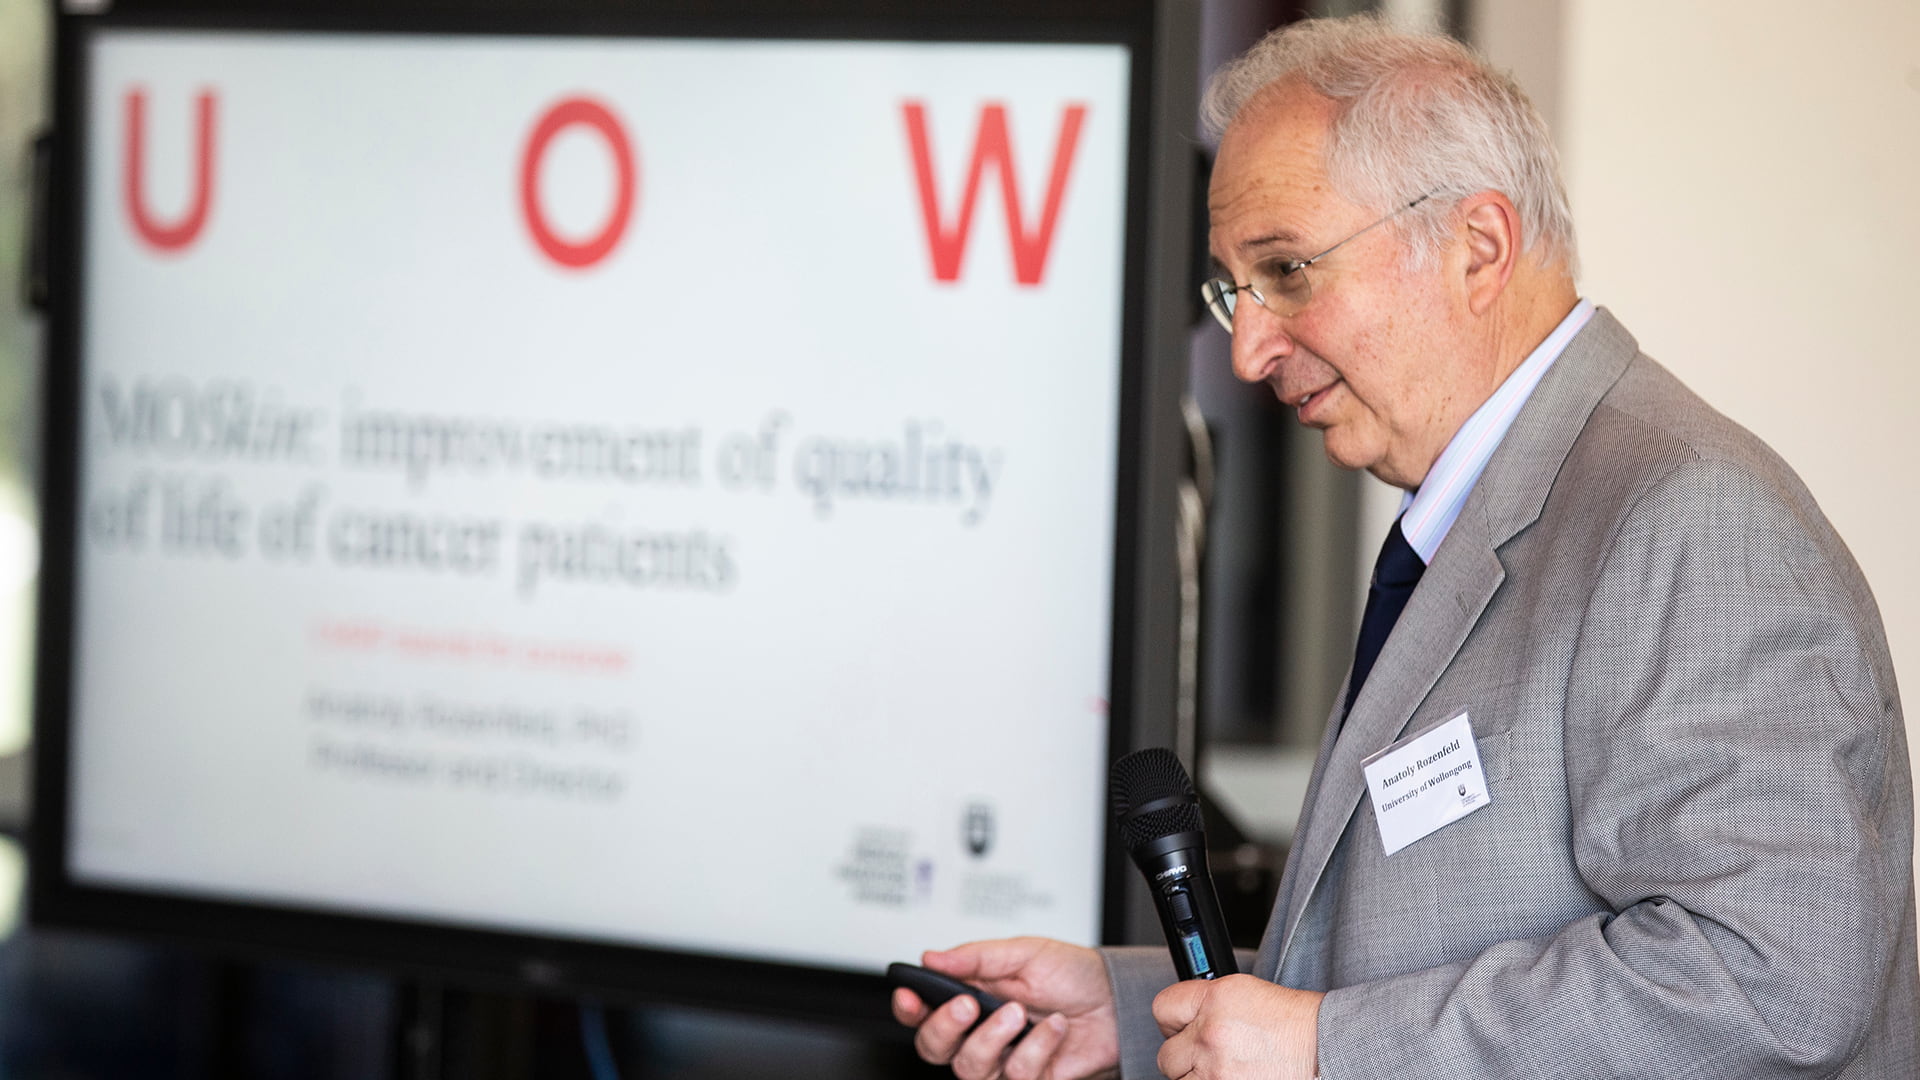 Professor Anatoly Rozenfeld at the MOSkin spinout launch in November 2019